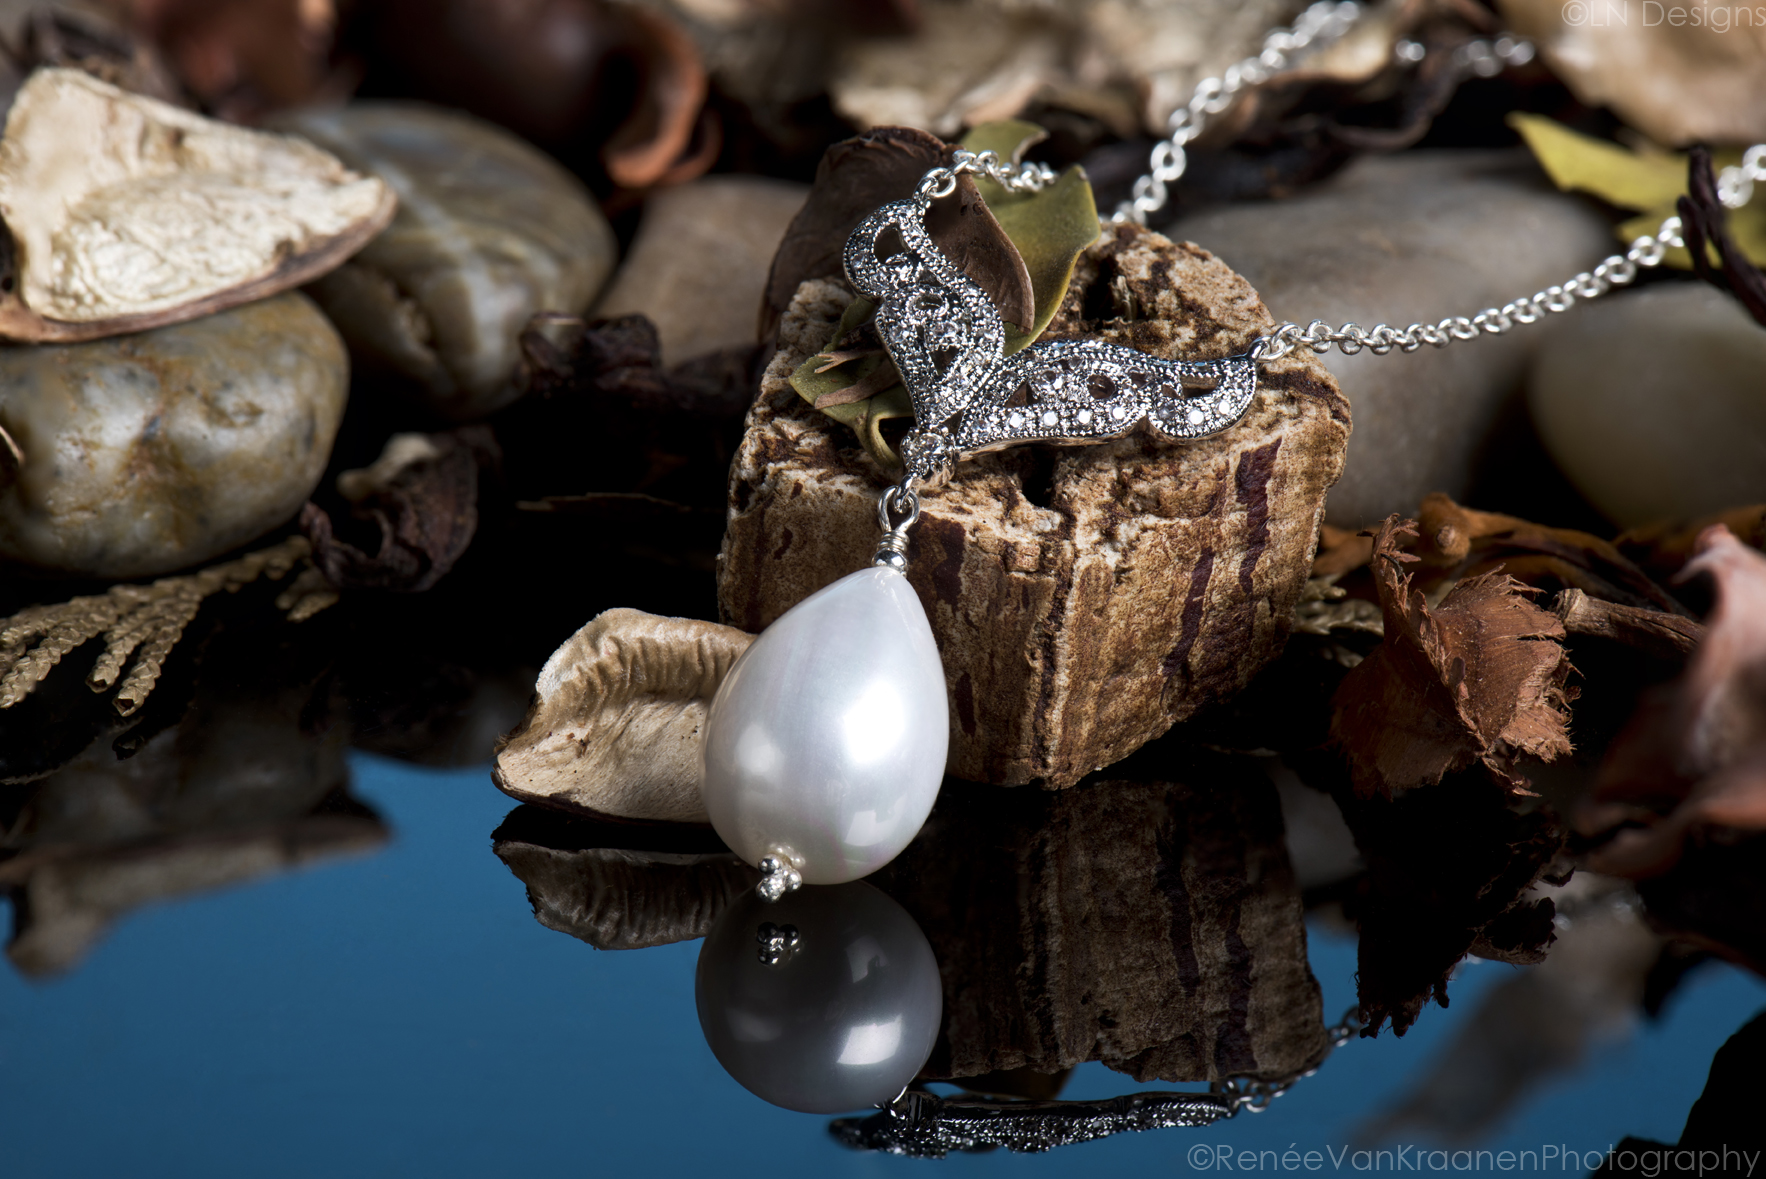 A tear drop pearl necklace sits on some leaves and bark under studio lighting